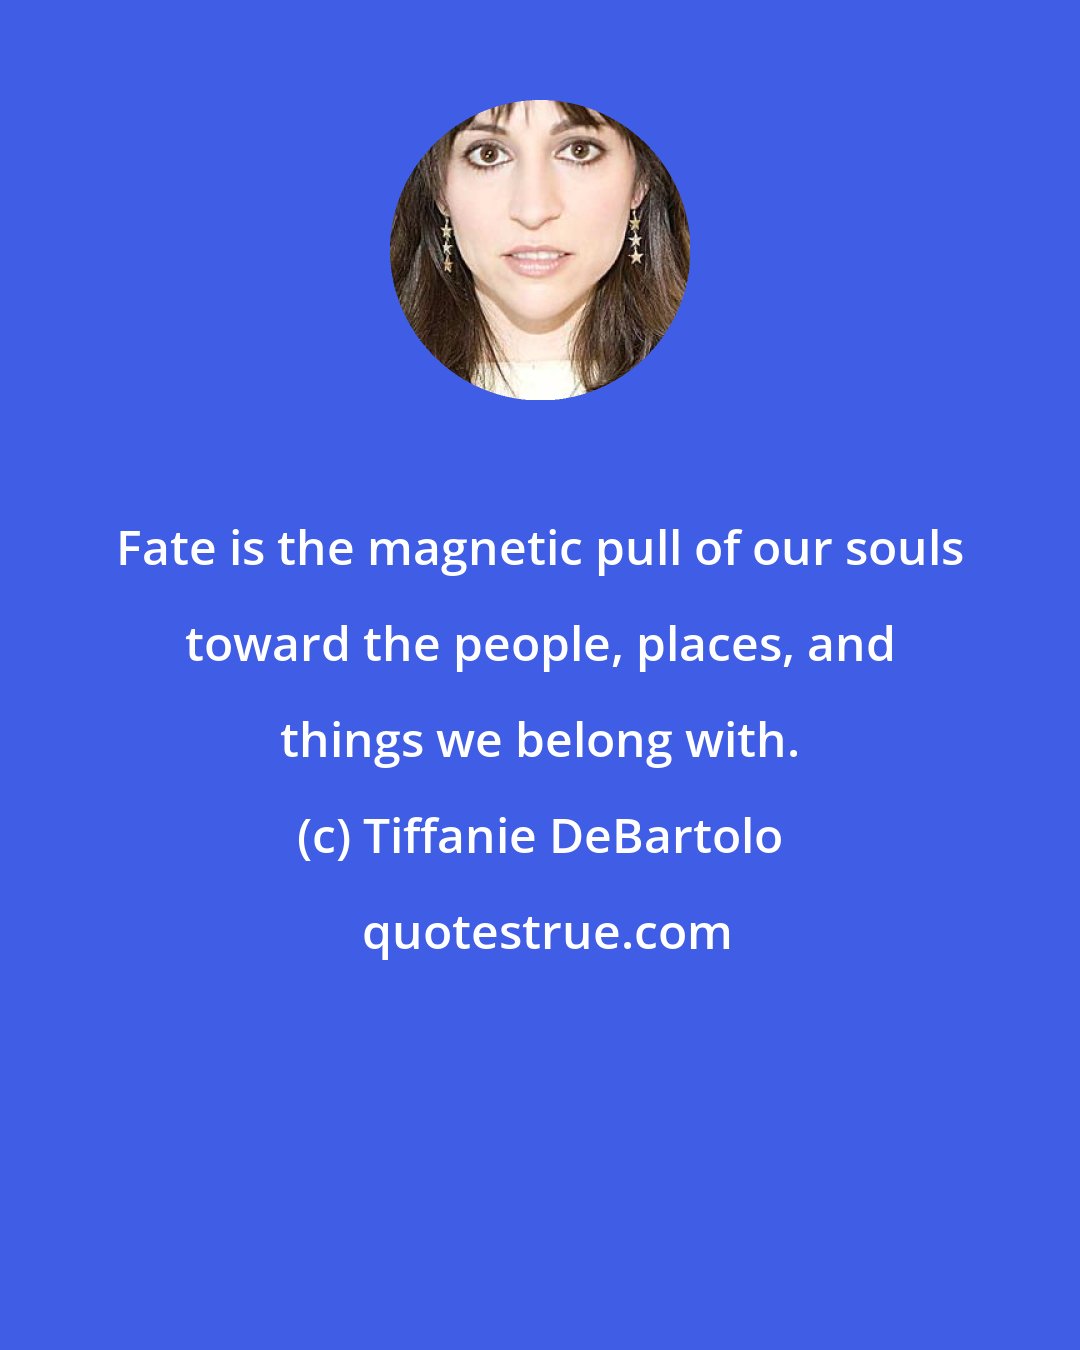 Tiffanie DeBartolo: Fate is the magnetic pull of our souls toward the people, places, and things we belong with.